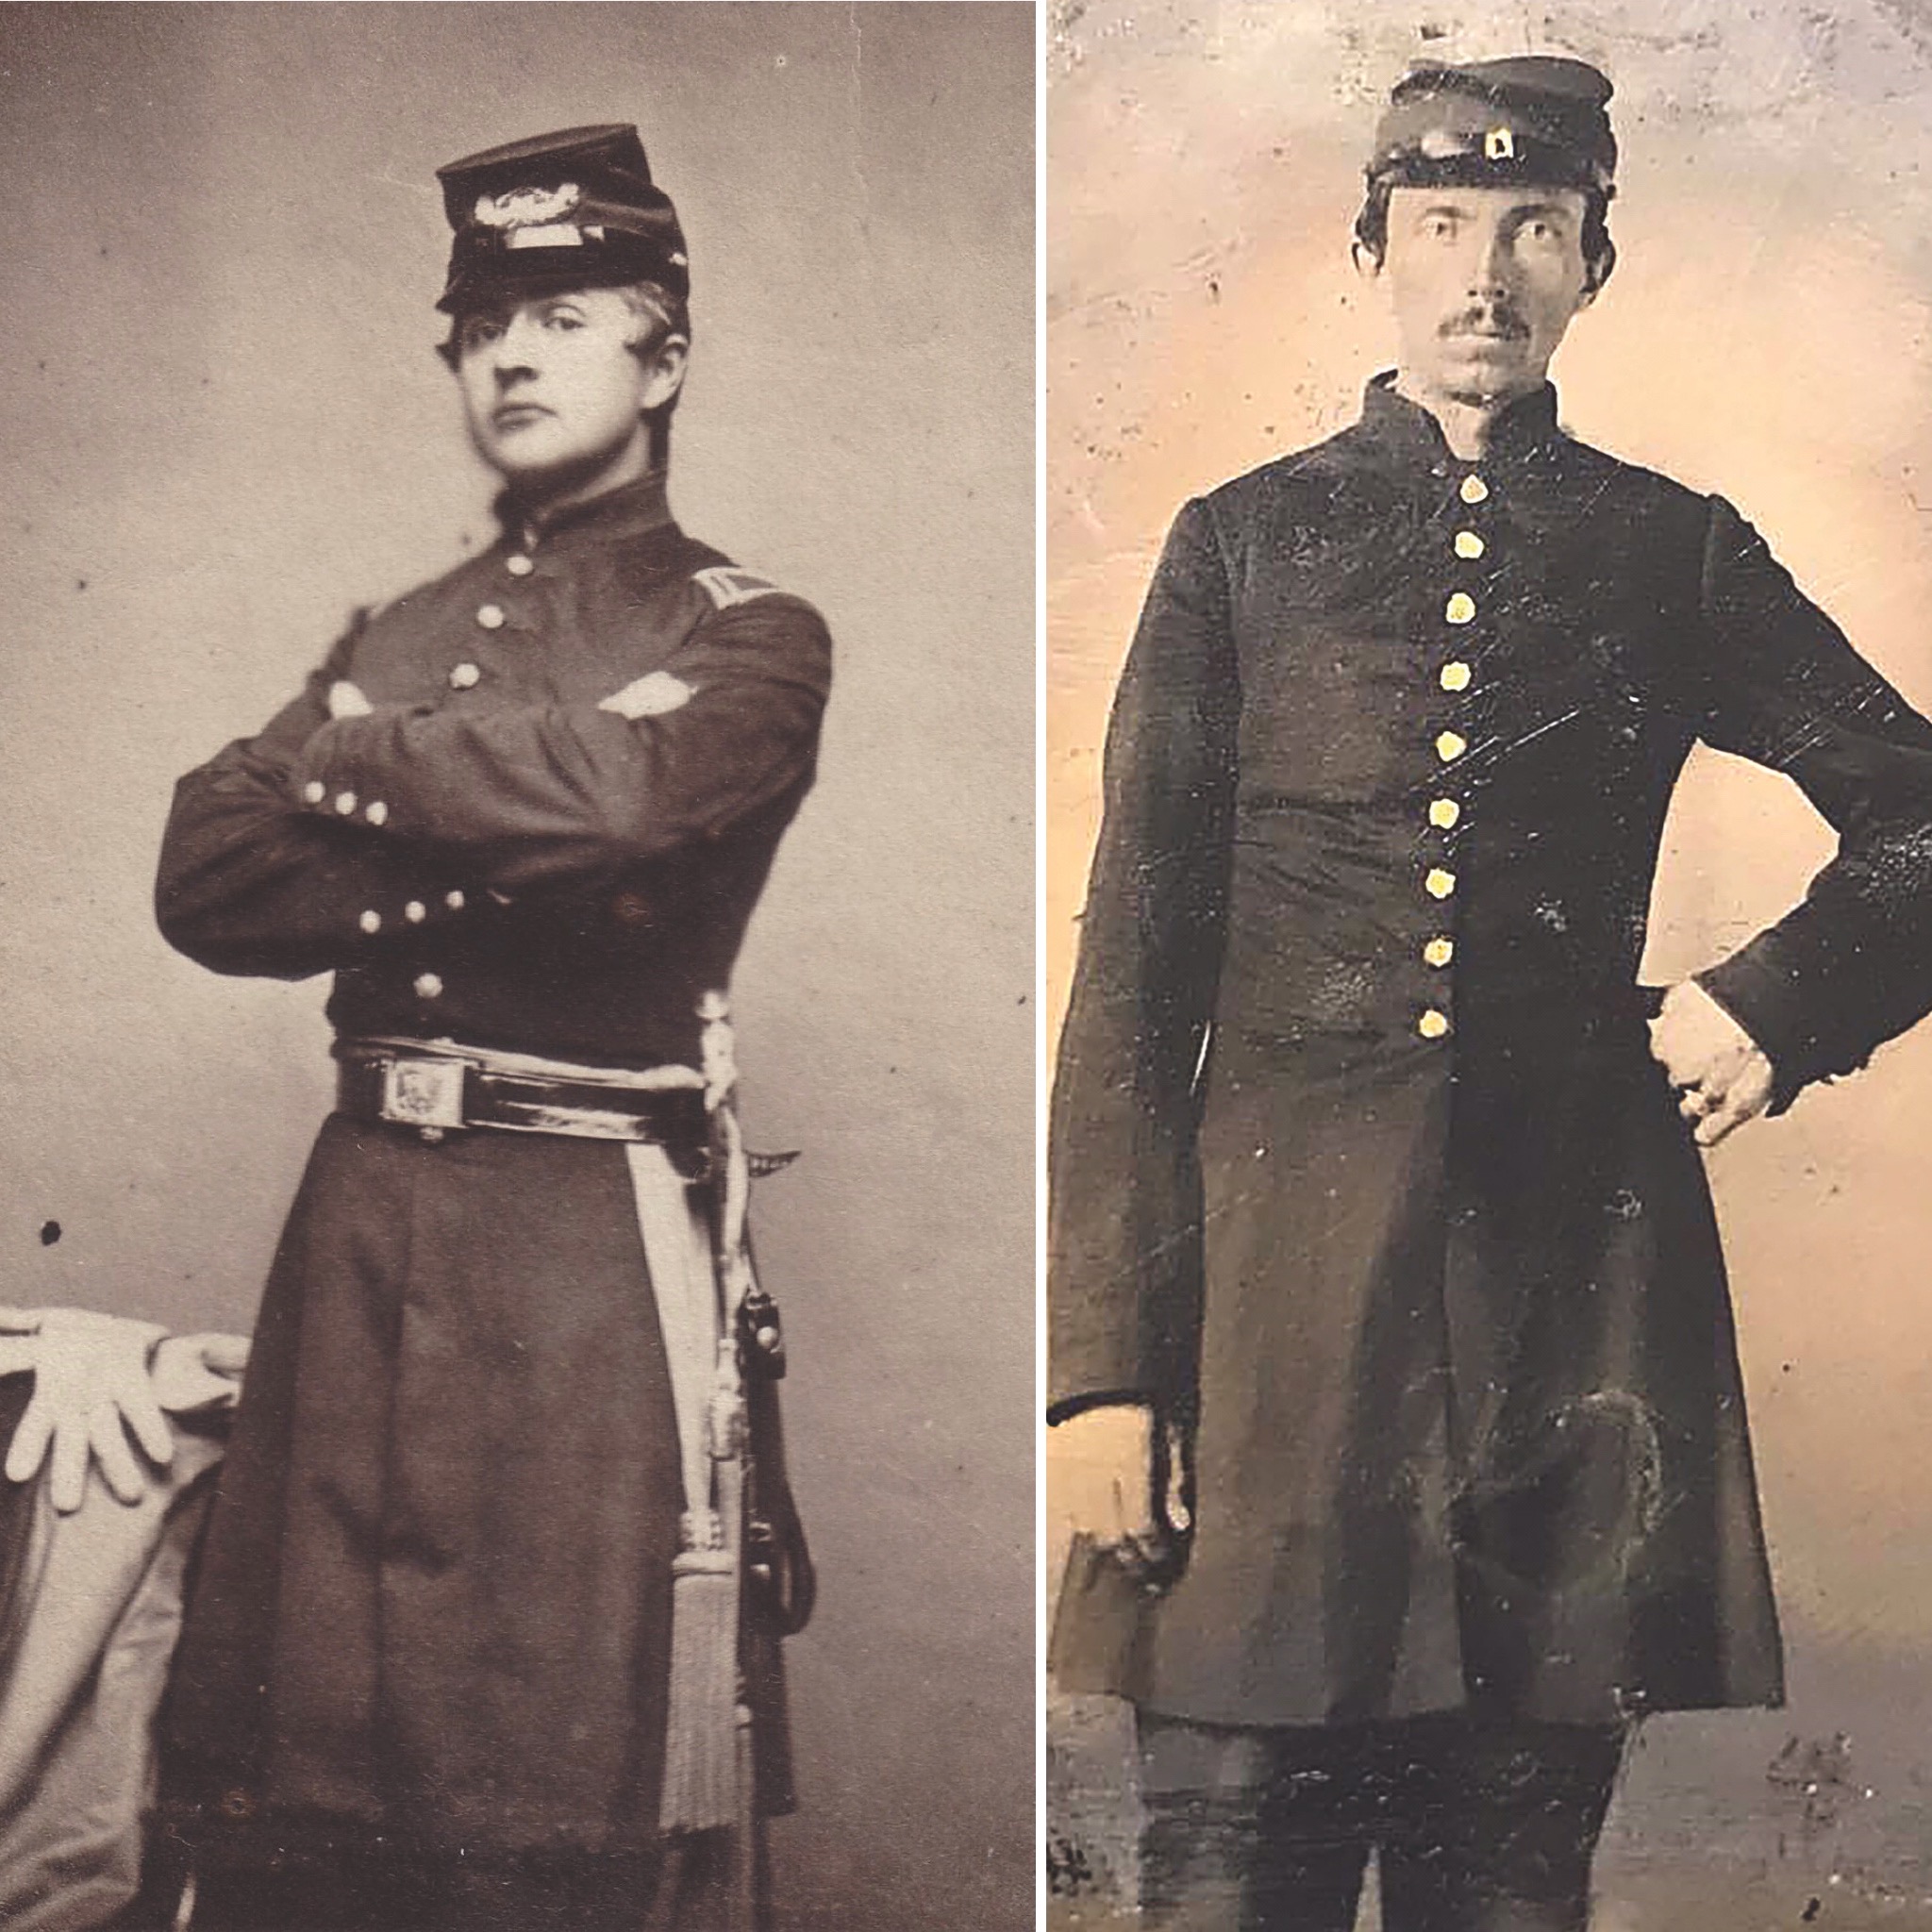 Lieutenant Lewis Parmelee (left), 2nd U.S. Sharpshooters, shot five times, killed. At right, 2nd Lt. John Whitman, 2nd U.S. Sharpshooters, killed. (Courtesy of Brian White)